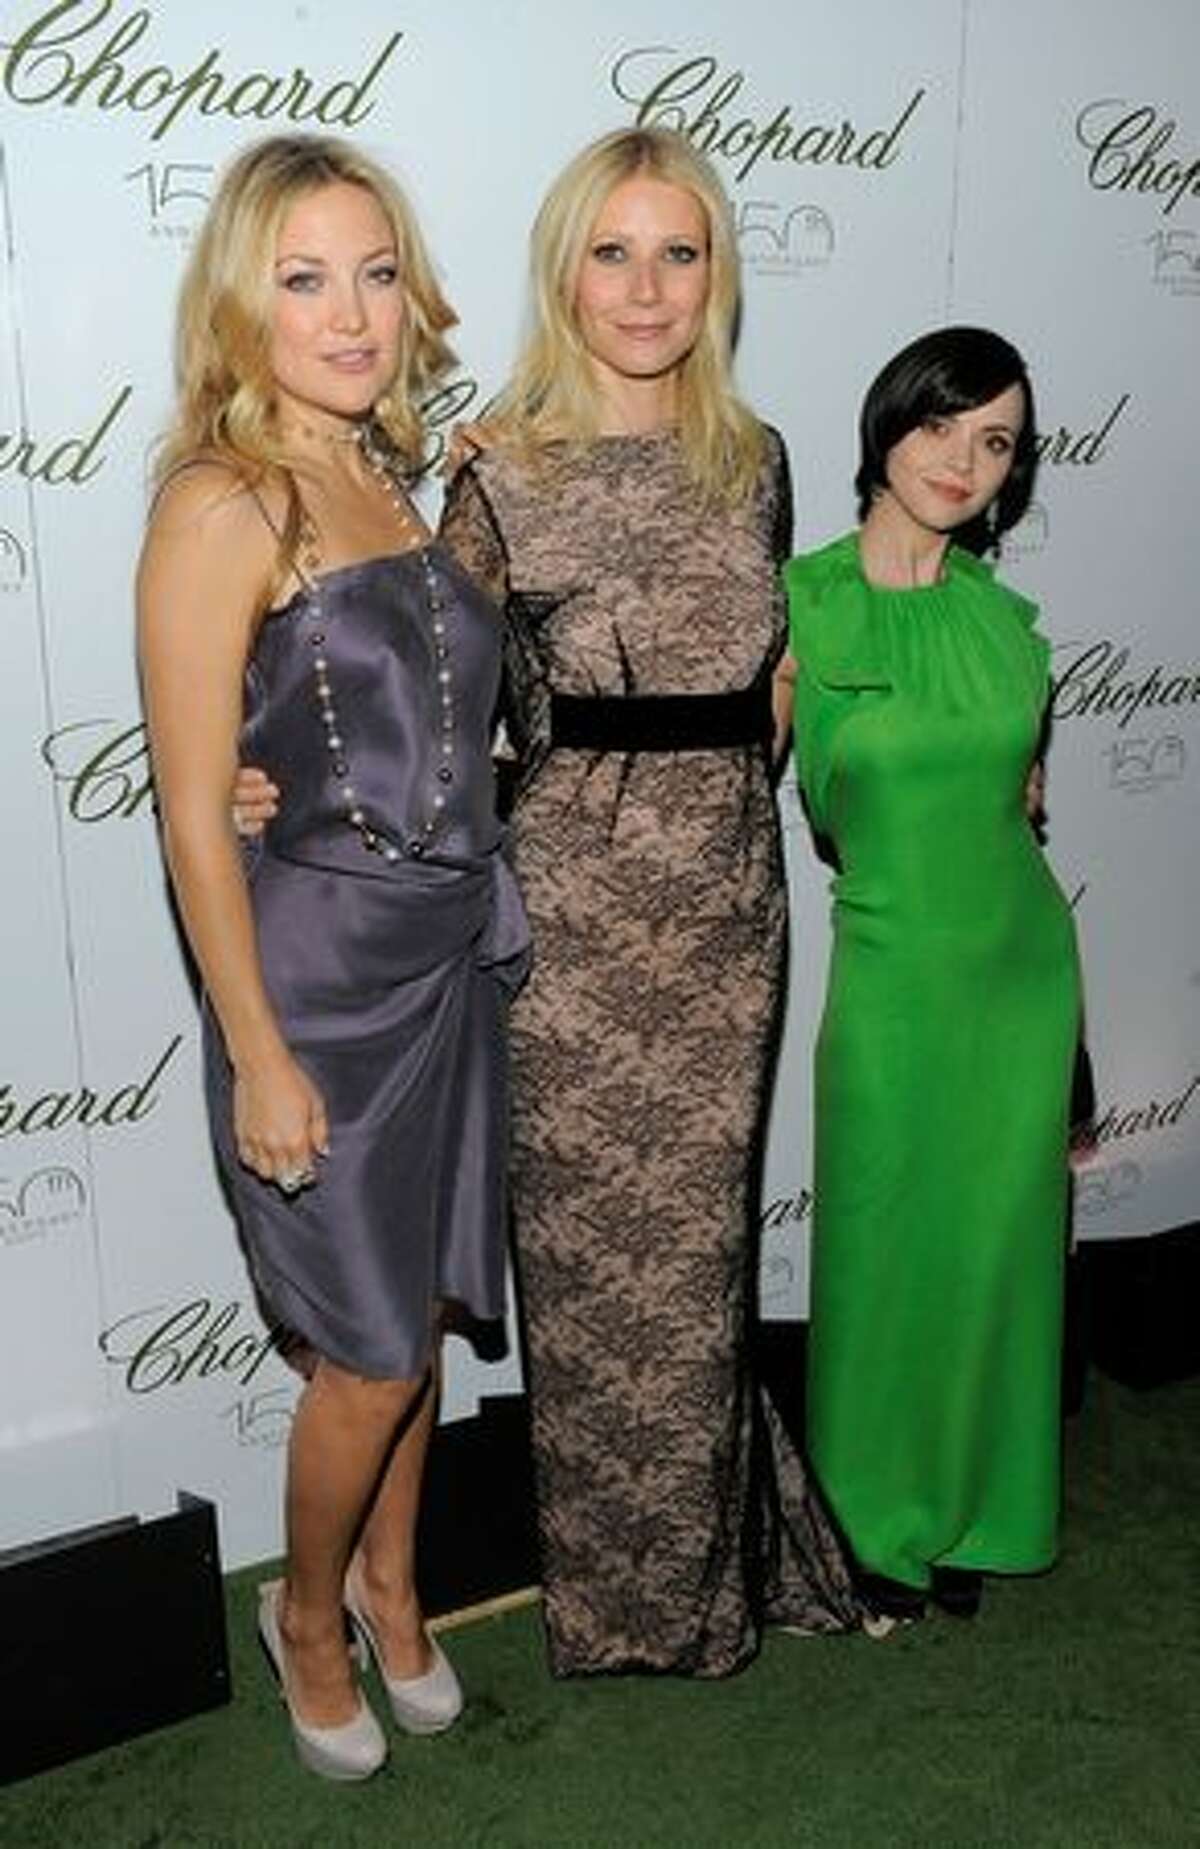 Actors Kate Hudson, Gwyneth Paltrow and Christina Ricci pose for a photo at the star studded gala celebrating Chopard's 150 years of excellence at The Frick Collection on April 29, 2010 in New York City.